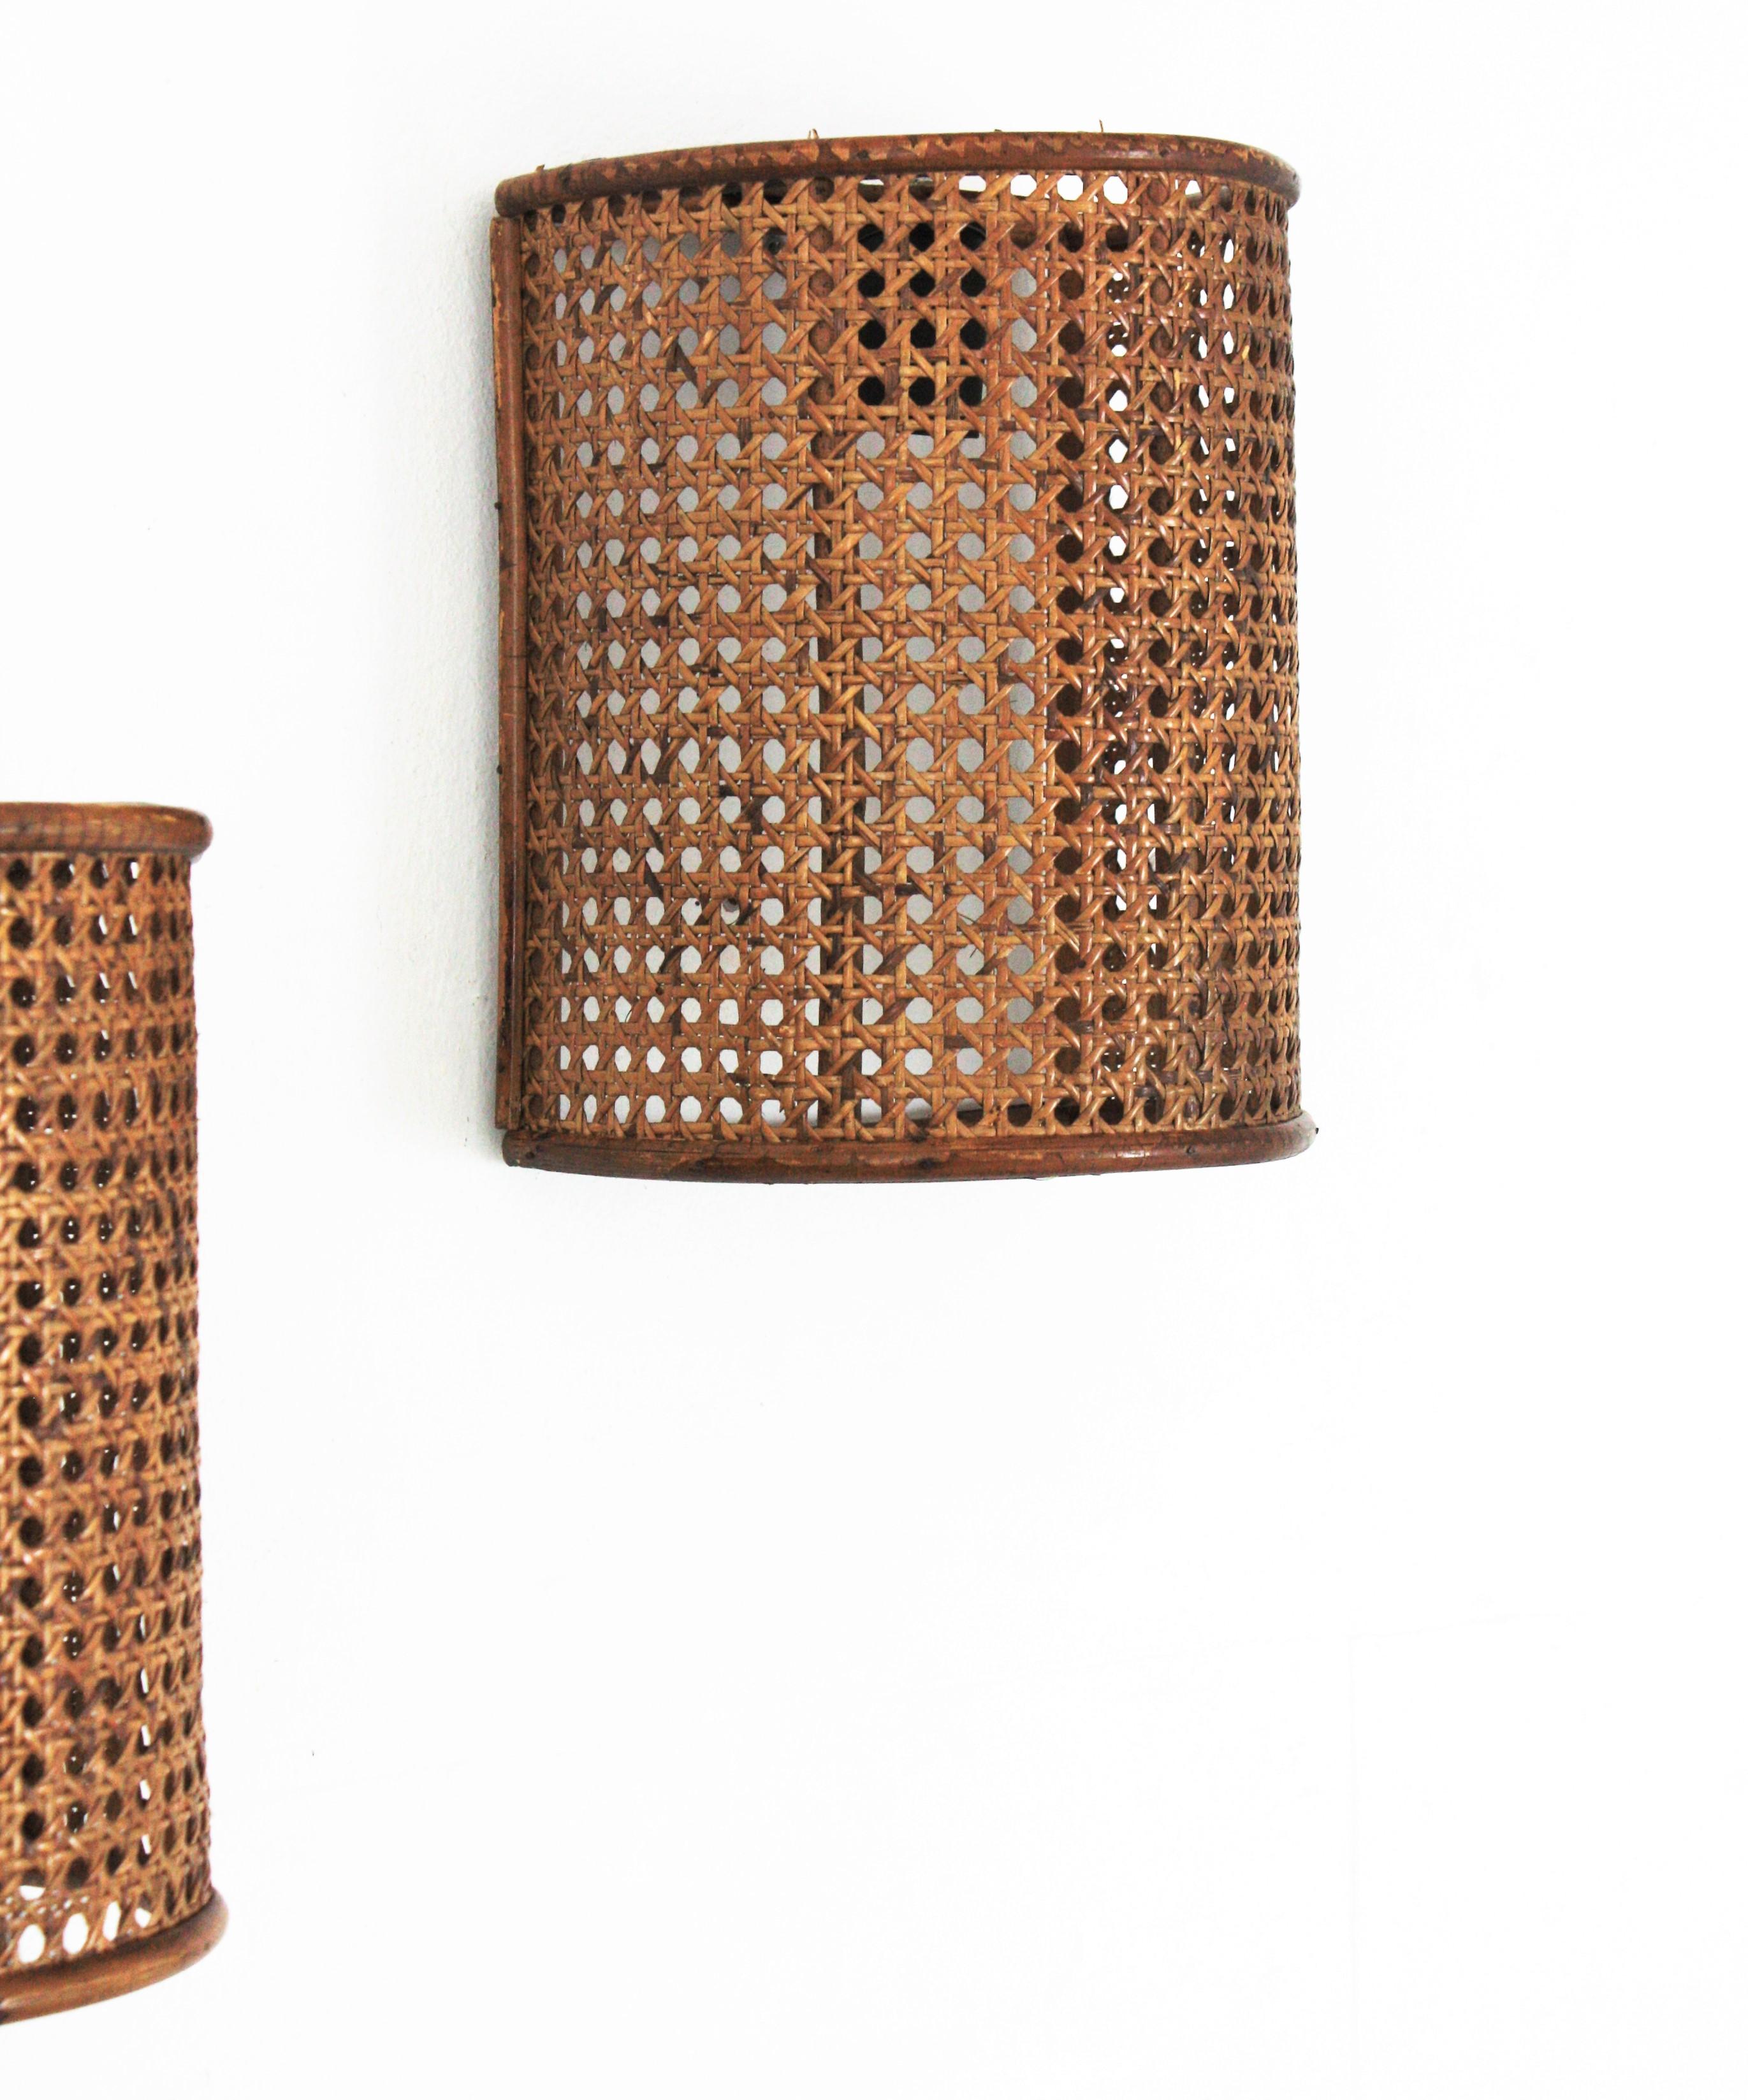 Italian Midcentury Woven Wicker Weave and Rattan Wall Sconces, Set of Three